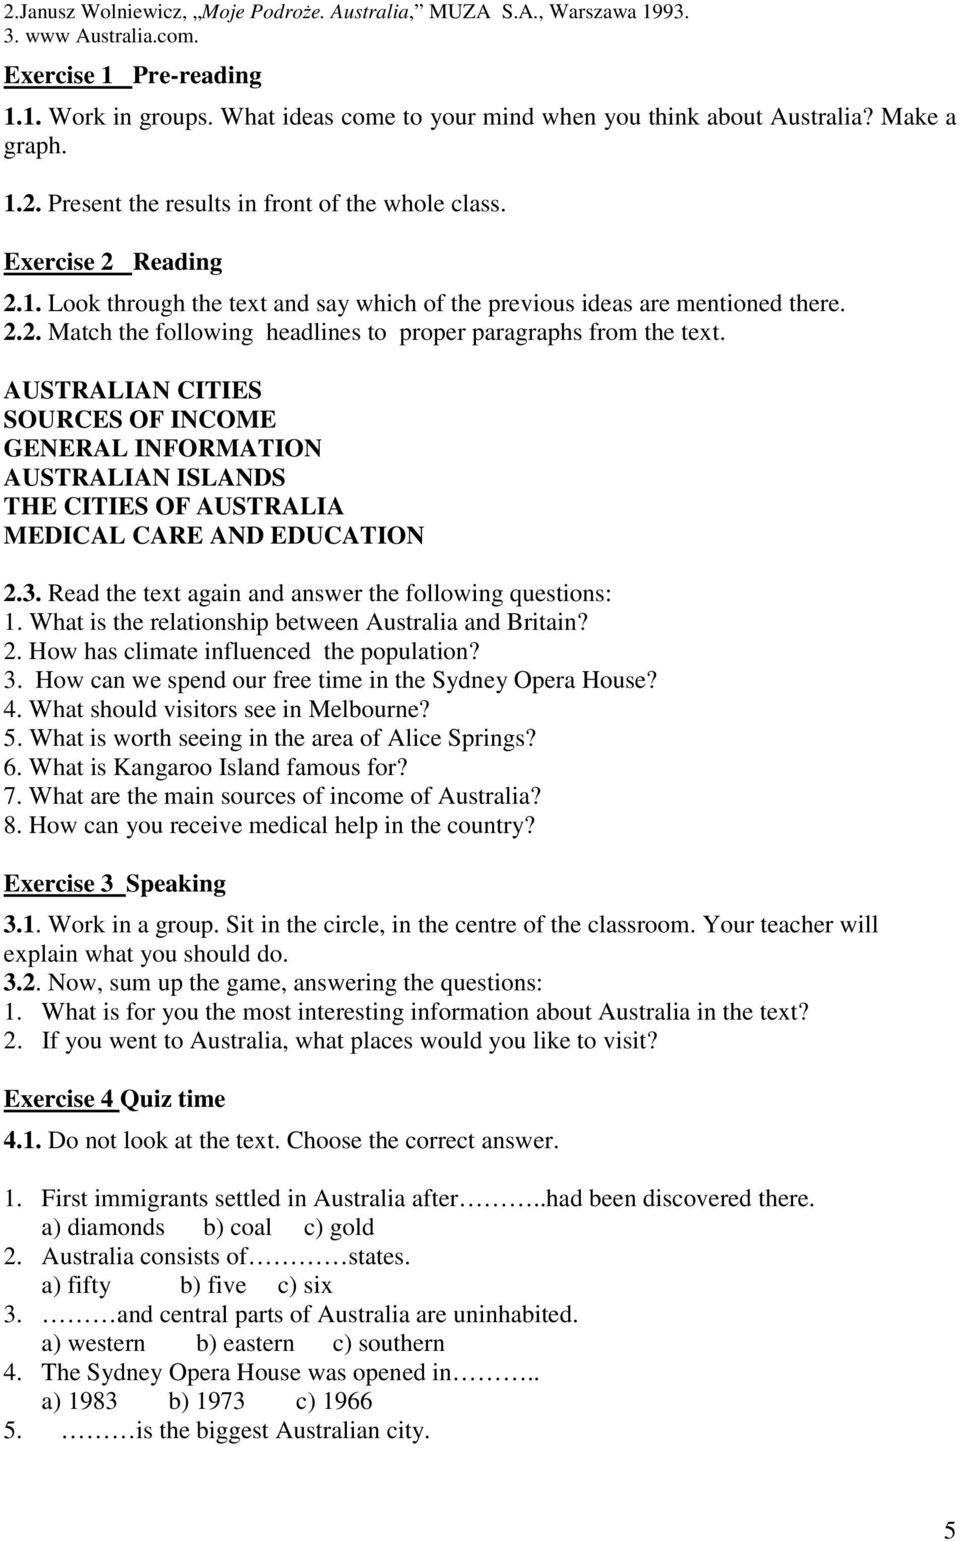 AUSTRALIAN CITIES SOURCES OF INCOME GENERAL INFORMATION AUSTRALIAN ISLANDS THE CITIES OF AUSTRALIA MEDICAL CARE AND EDUCATION 2.3. Read the text again and answer the following questions: 1.